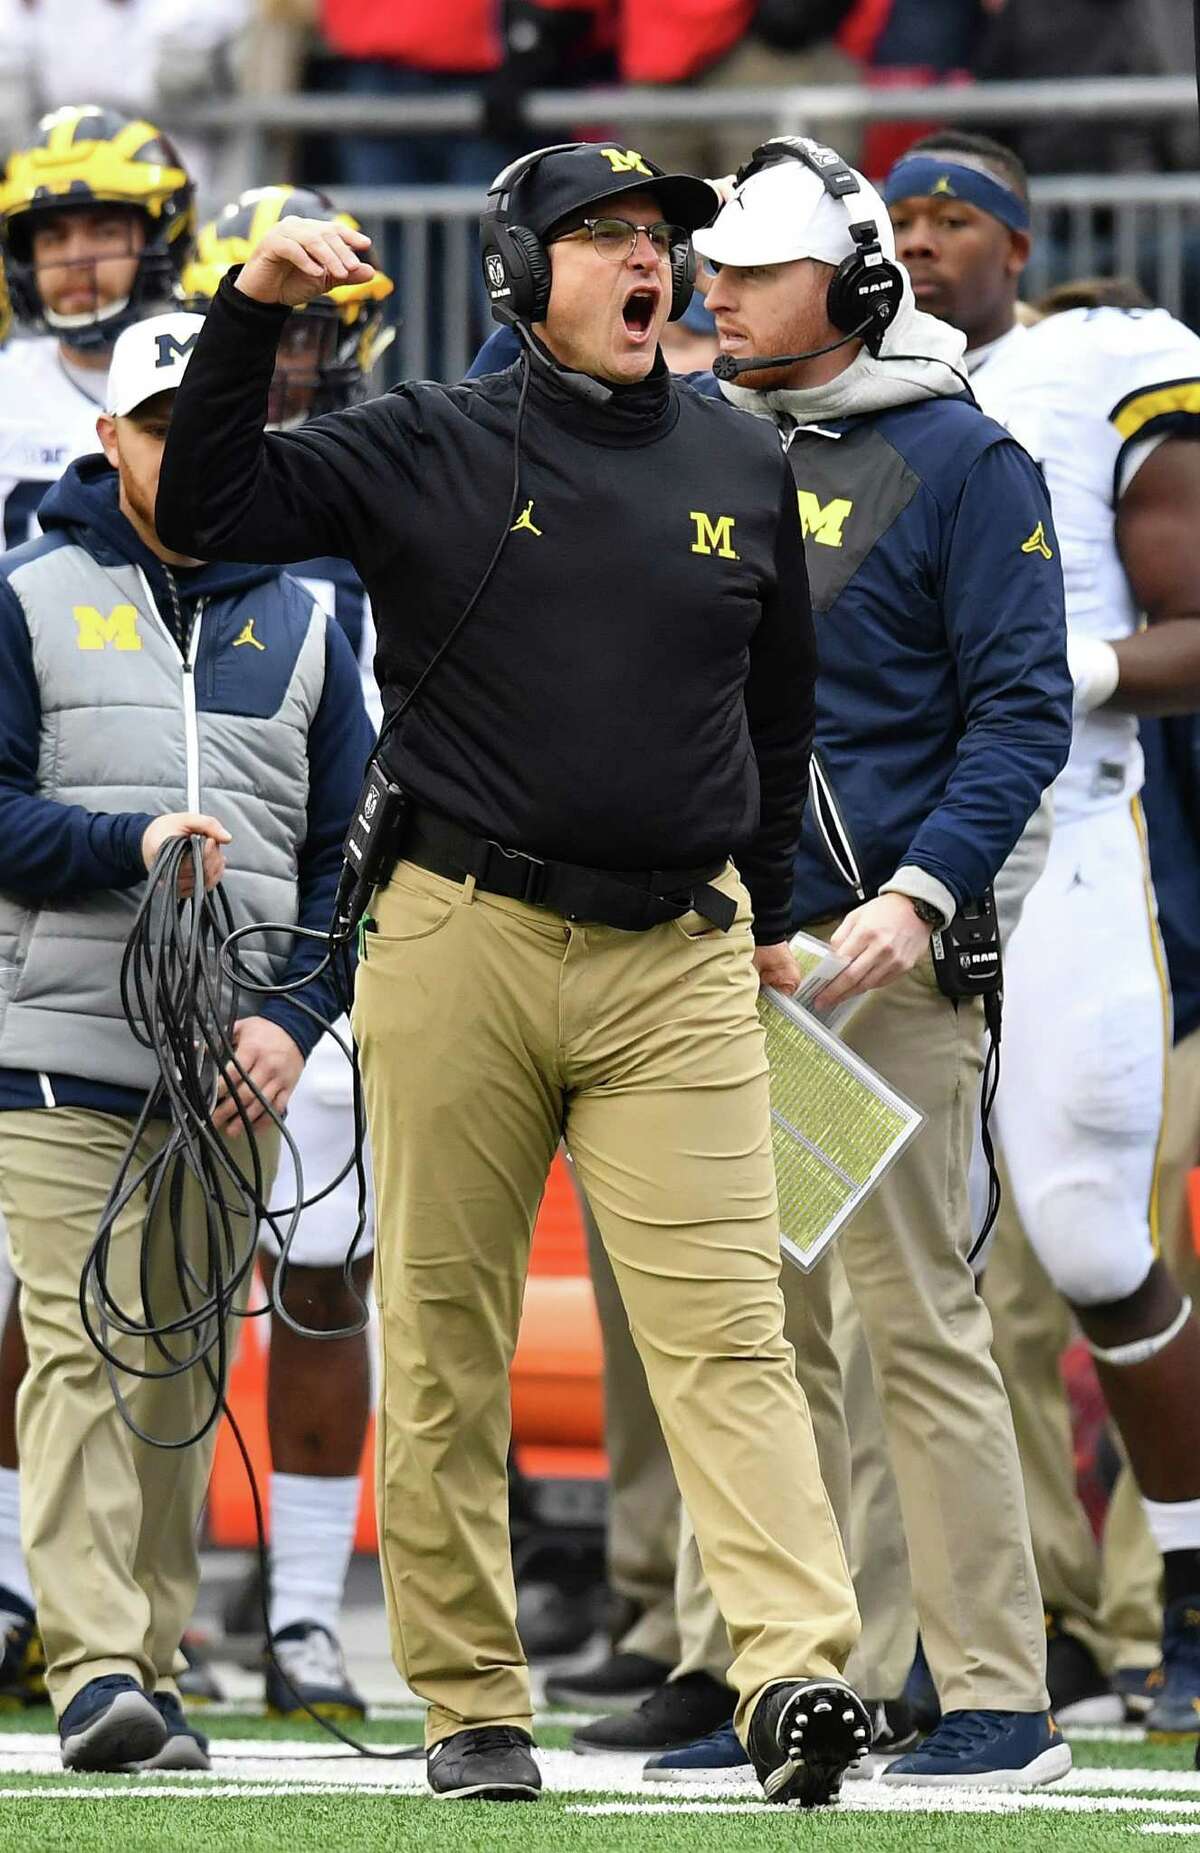 COLUMBUS, OH - NOVEMBER 26: Head coach Jim Harbaugh of the Michigan Wolverines argues a call on the sideline during the second half against the Ohio State Buckeyes at Ohio Stadium on November 26, 2016 in Columbus, Ohio.